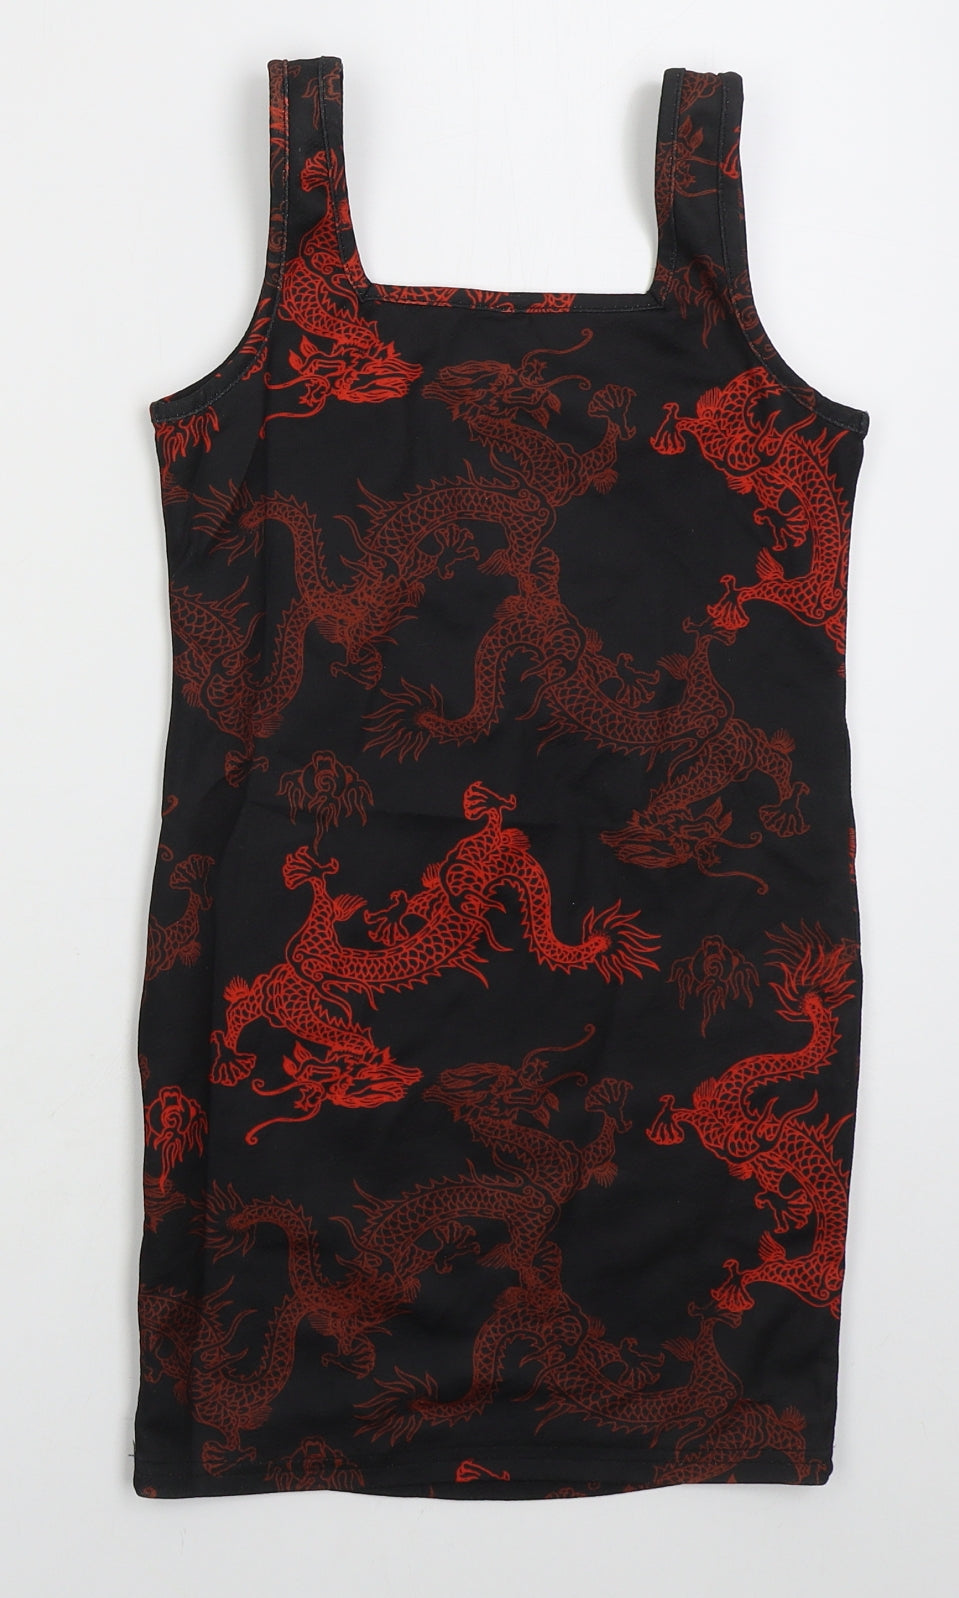 SheIn Girls Black  Polyester Tank Dress  Size 9 Years  Square Neck Pullover - Red Dragons